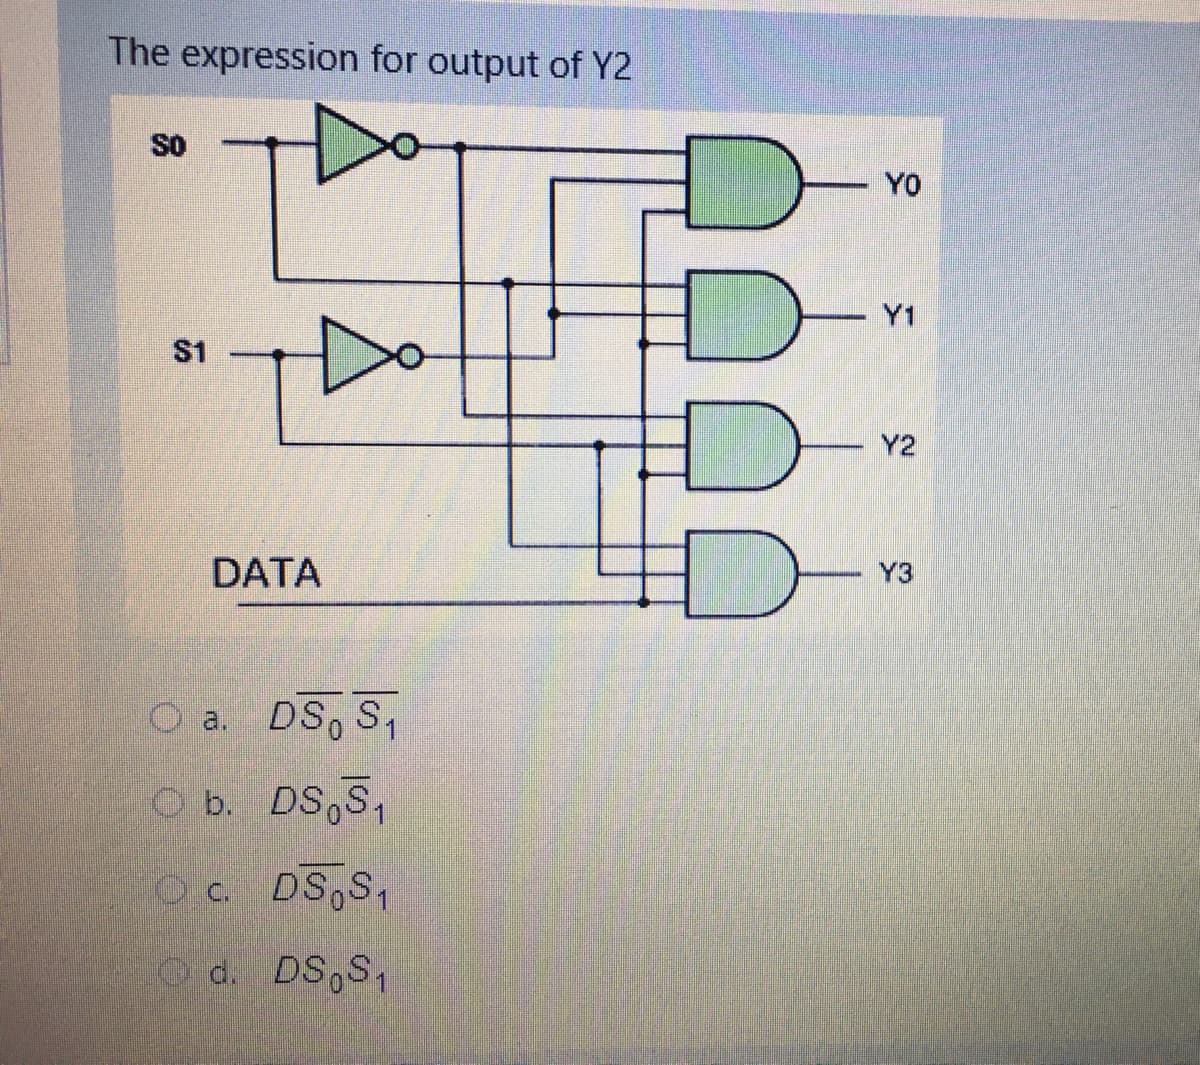 The expression for output of Y2
SO
YO
-Y1
S1
Y2
DATA
Y3
O a. DS, S,
O b. DS,S,
c. DS,S,
Od. DS,S,
